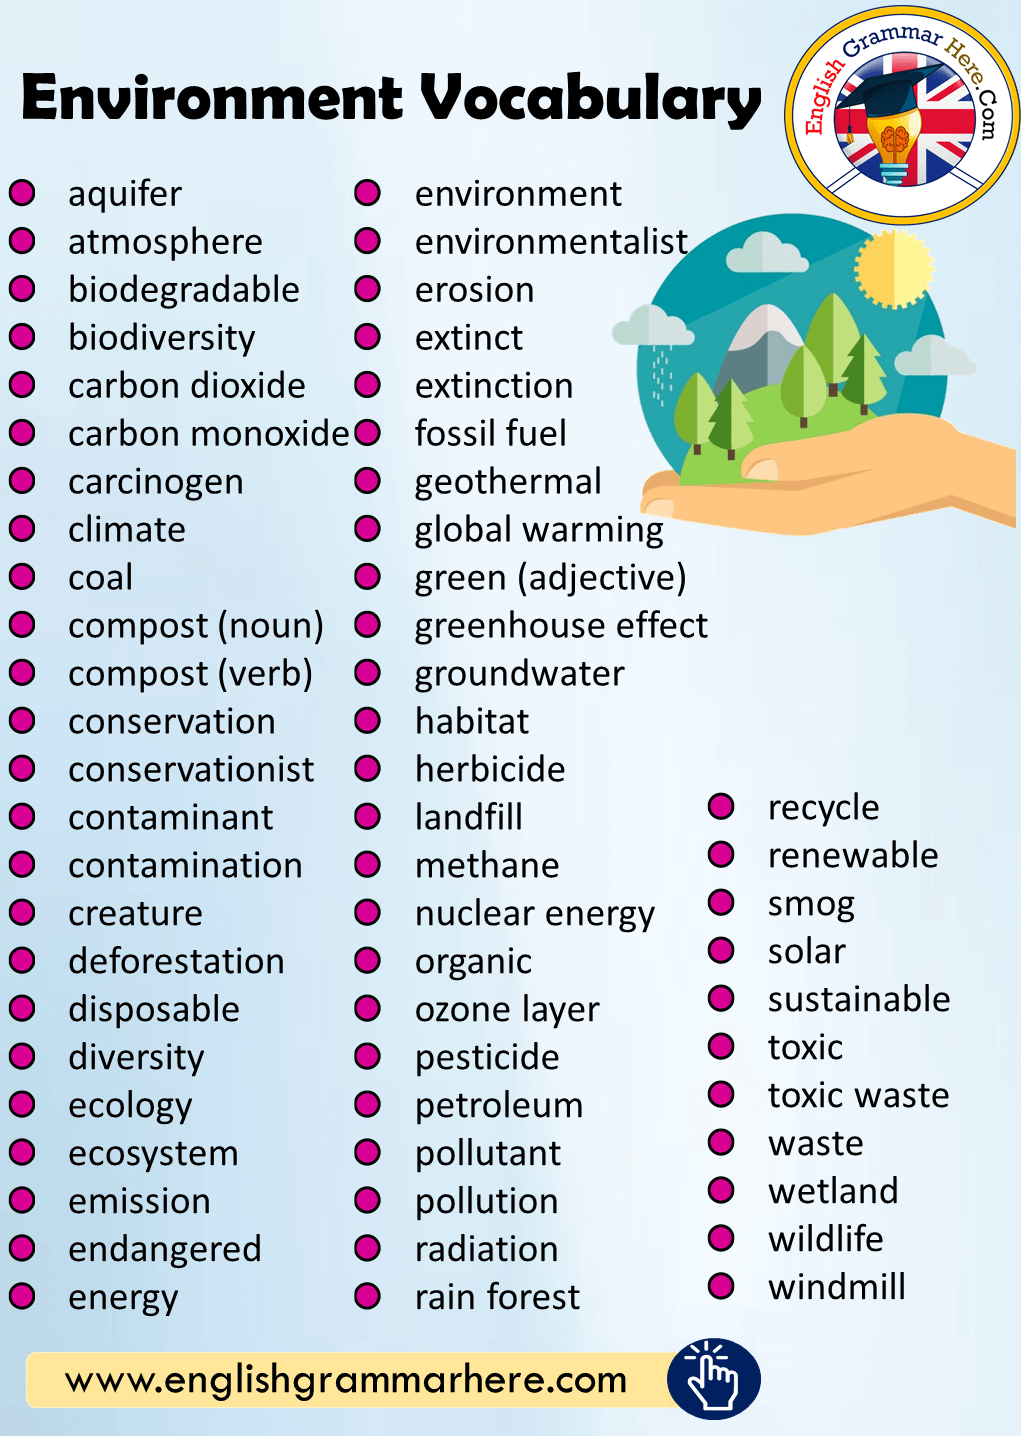 What are some example words for environment?